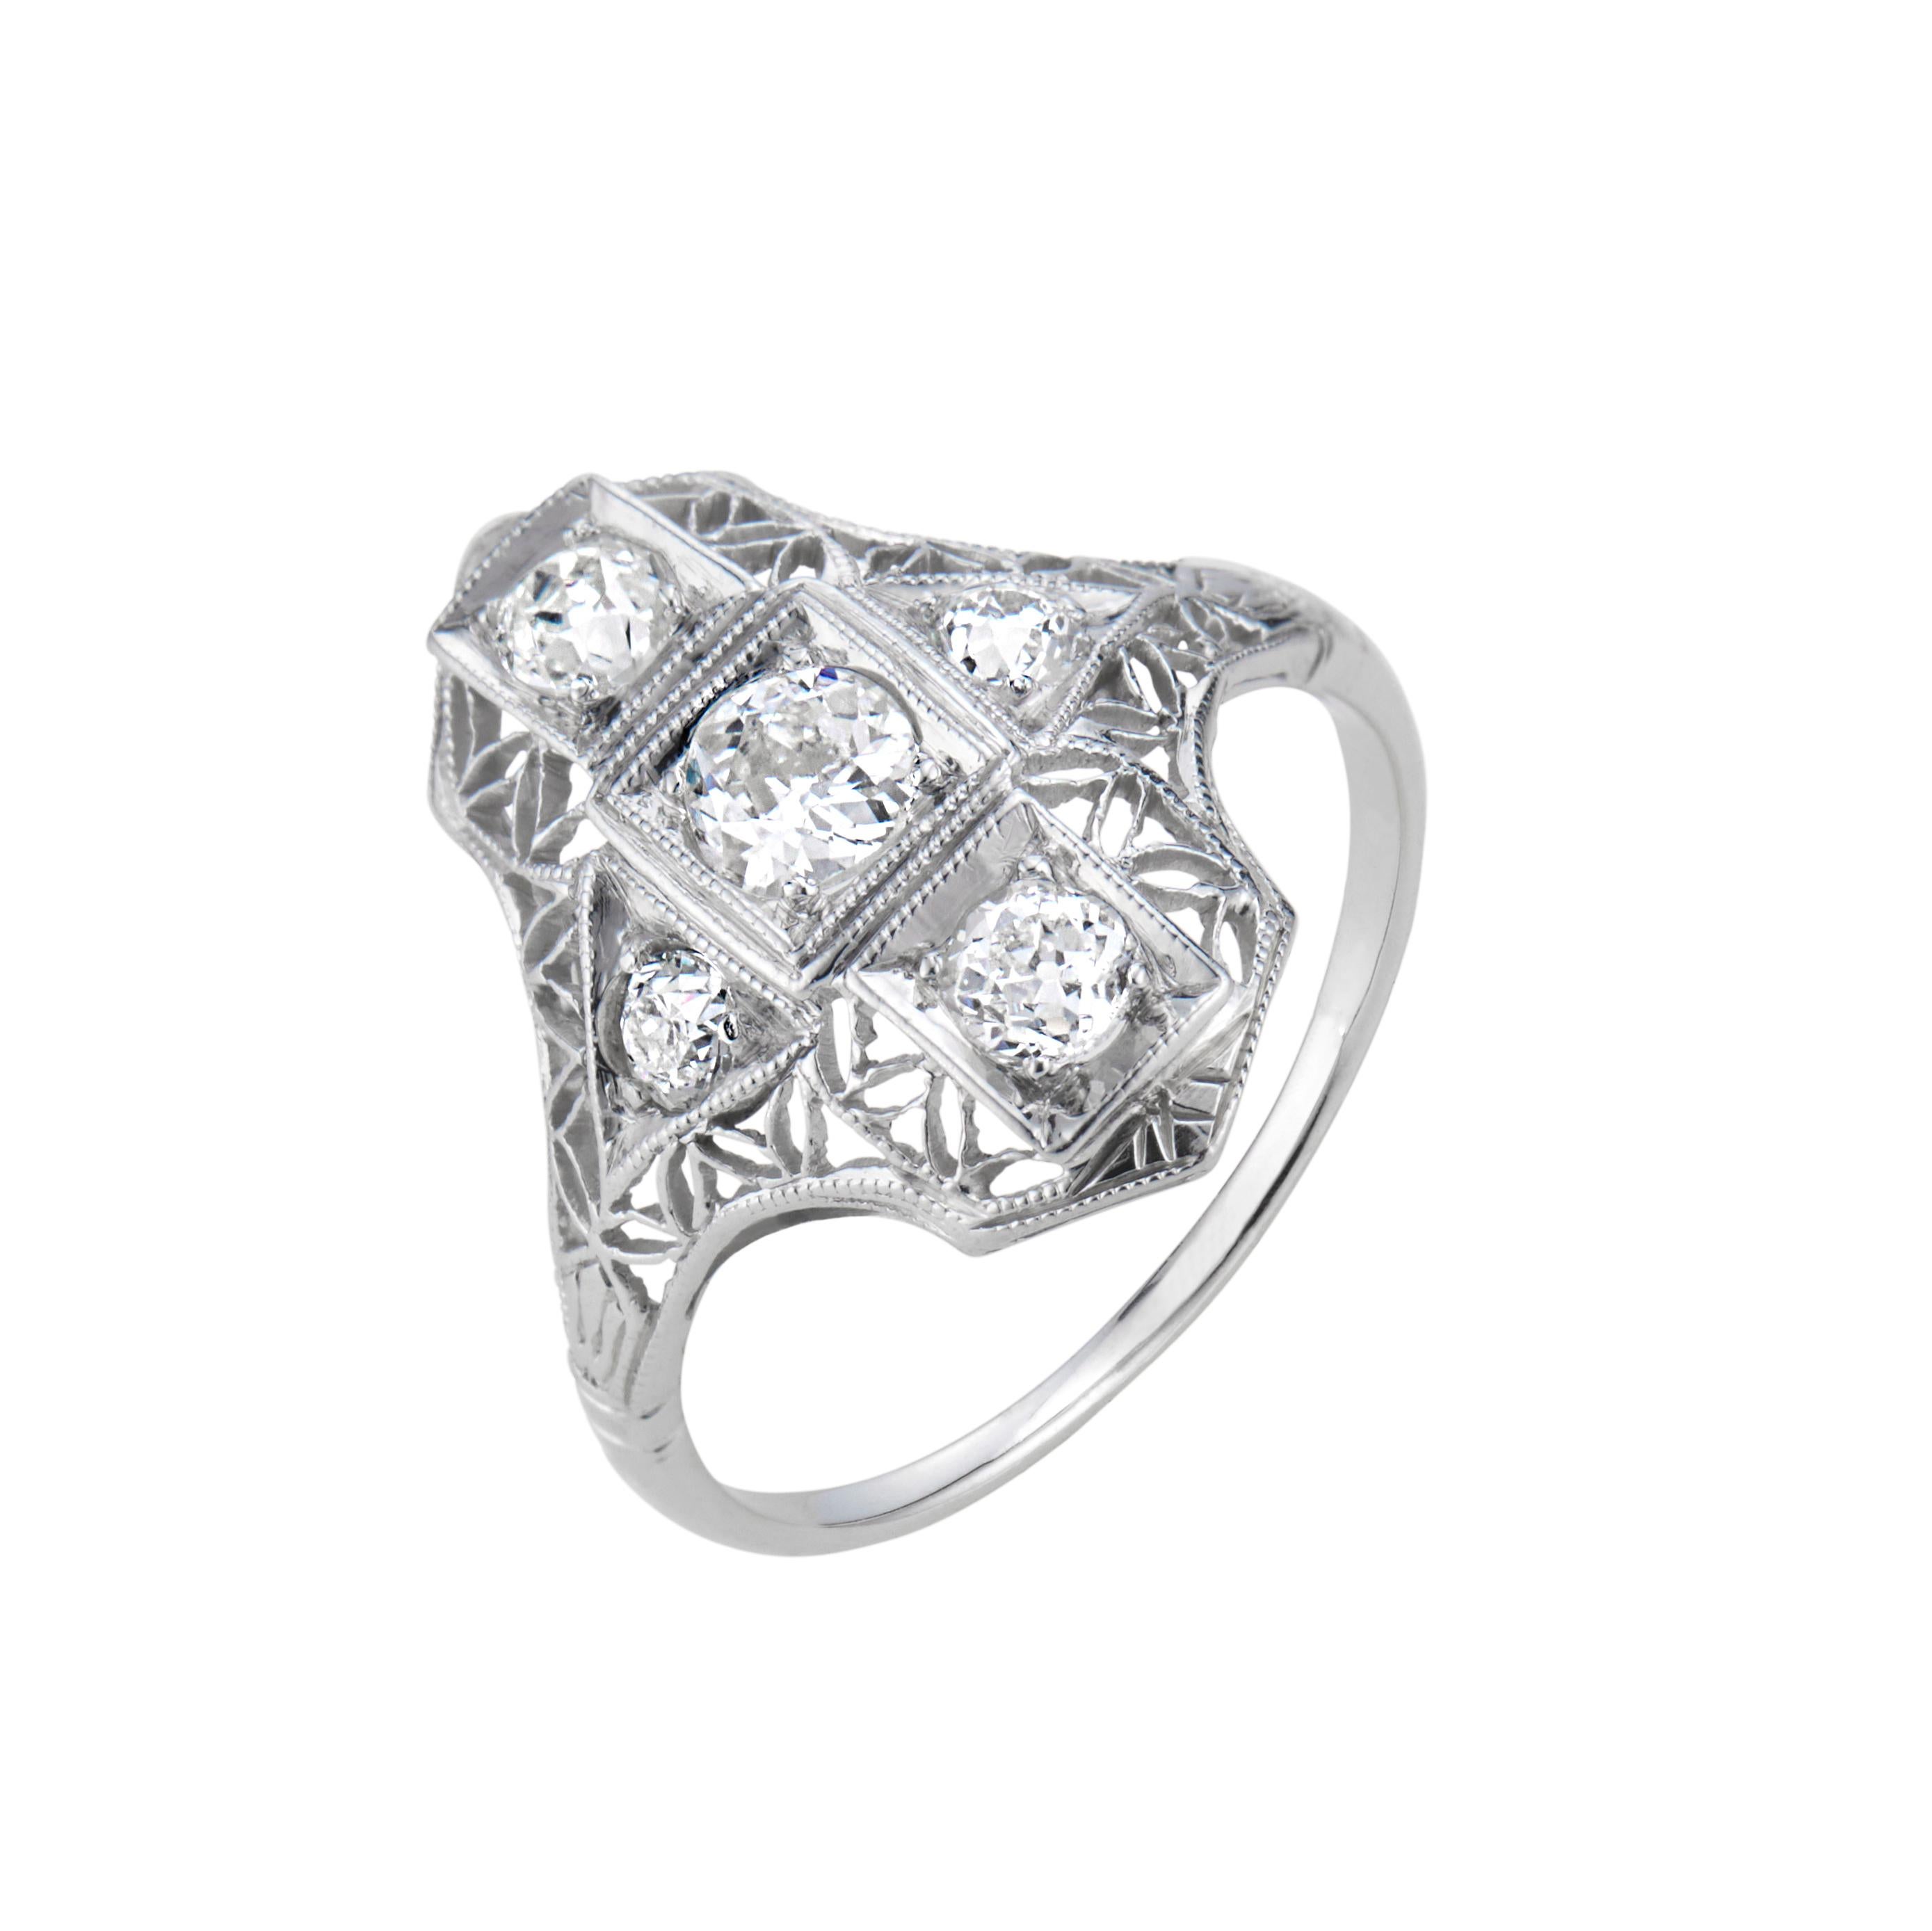 Vintage 1900's Edwardian diamond platinum ring. 5 old mine cut diamonds in a filigree platinum setting. 

5 old mine cut diamonds, G-H-I VS-SI approx. .50cts
Size 5 and sizable 
Platinum 
2.6 grams 
Width at top: 17.4mm
Height at top: 3.5mm
Width at